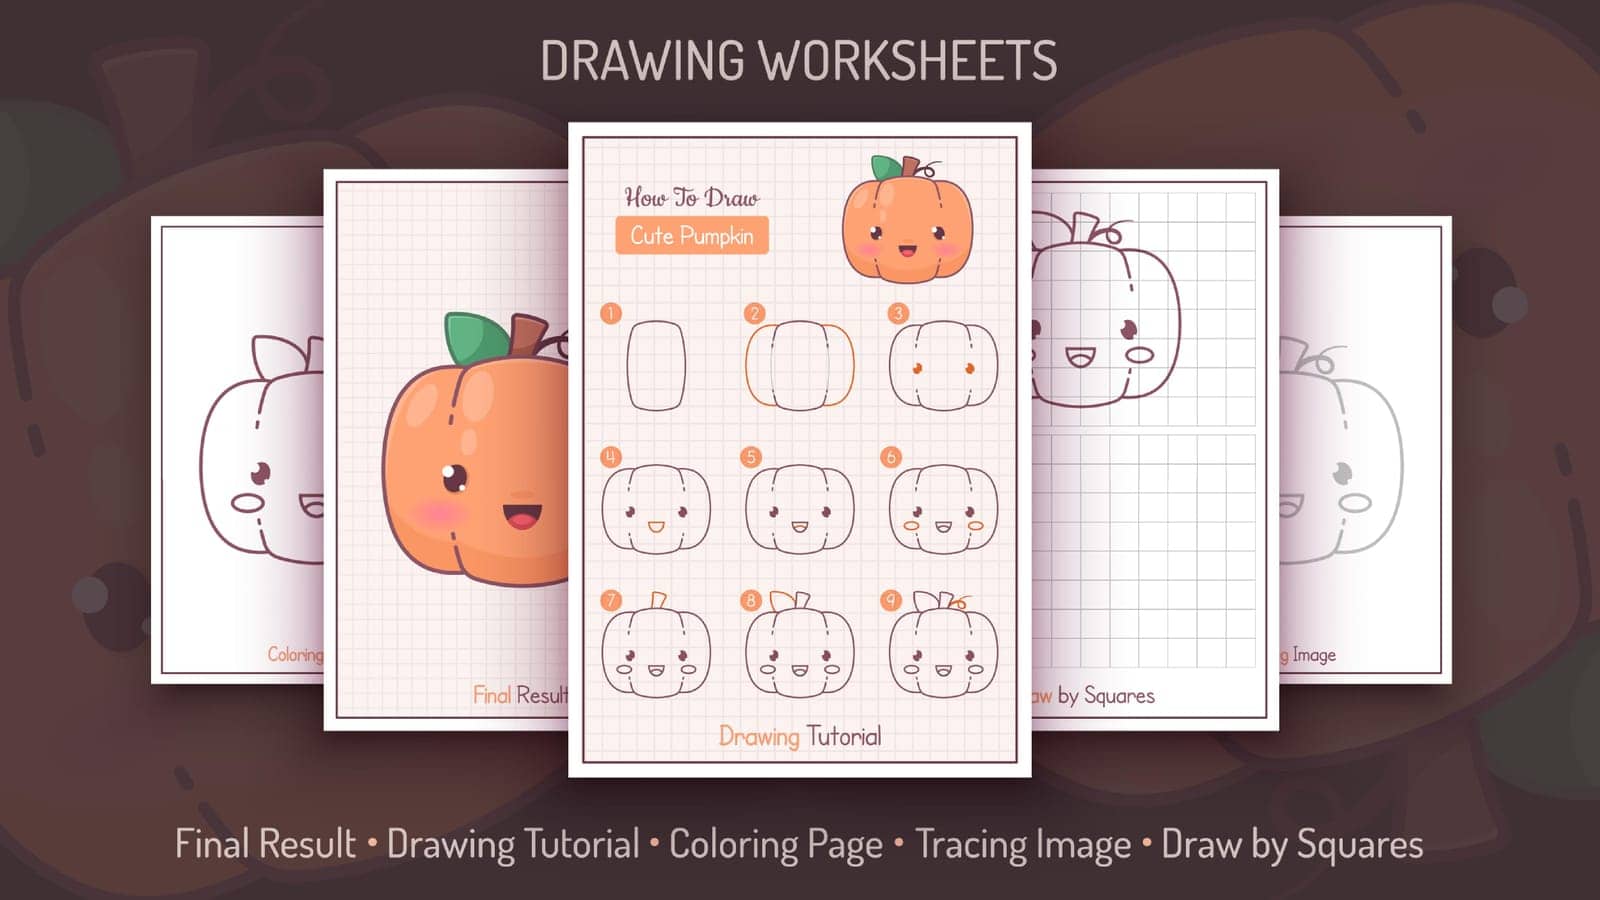 How to Draw a Pumpkin. Step by Step Drawing Tutorial. Draw Guide. Simple Instruction. Coloring Page. Worksheets for Kids and Adults by rwgusev